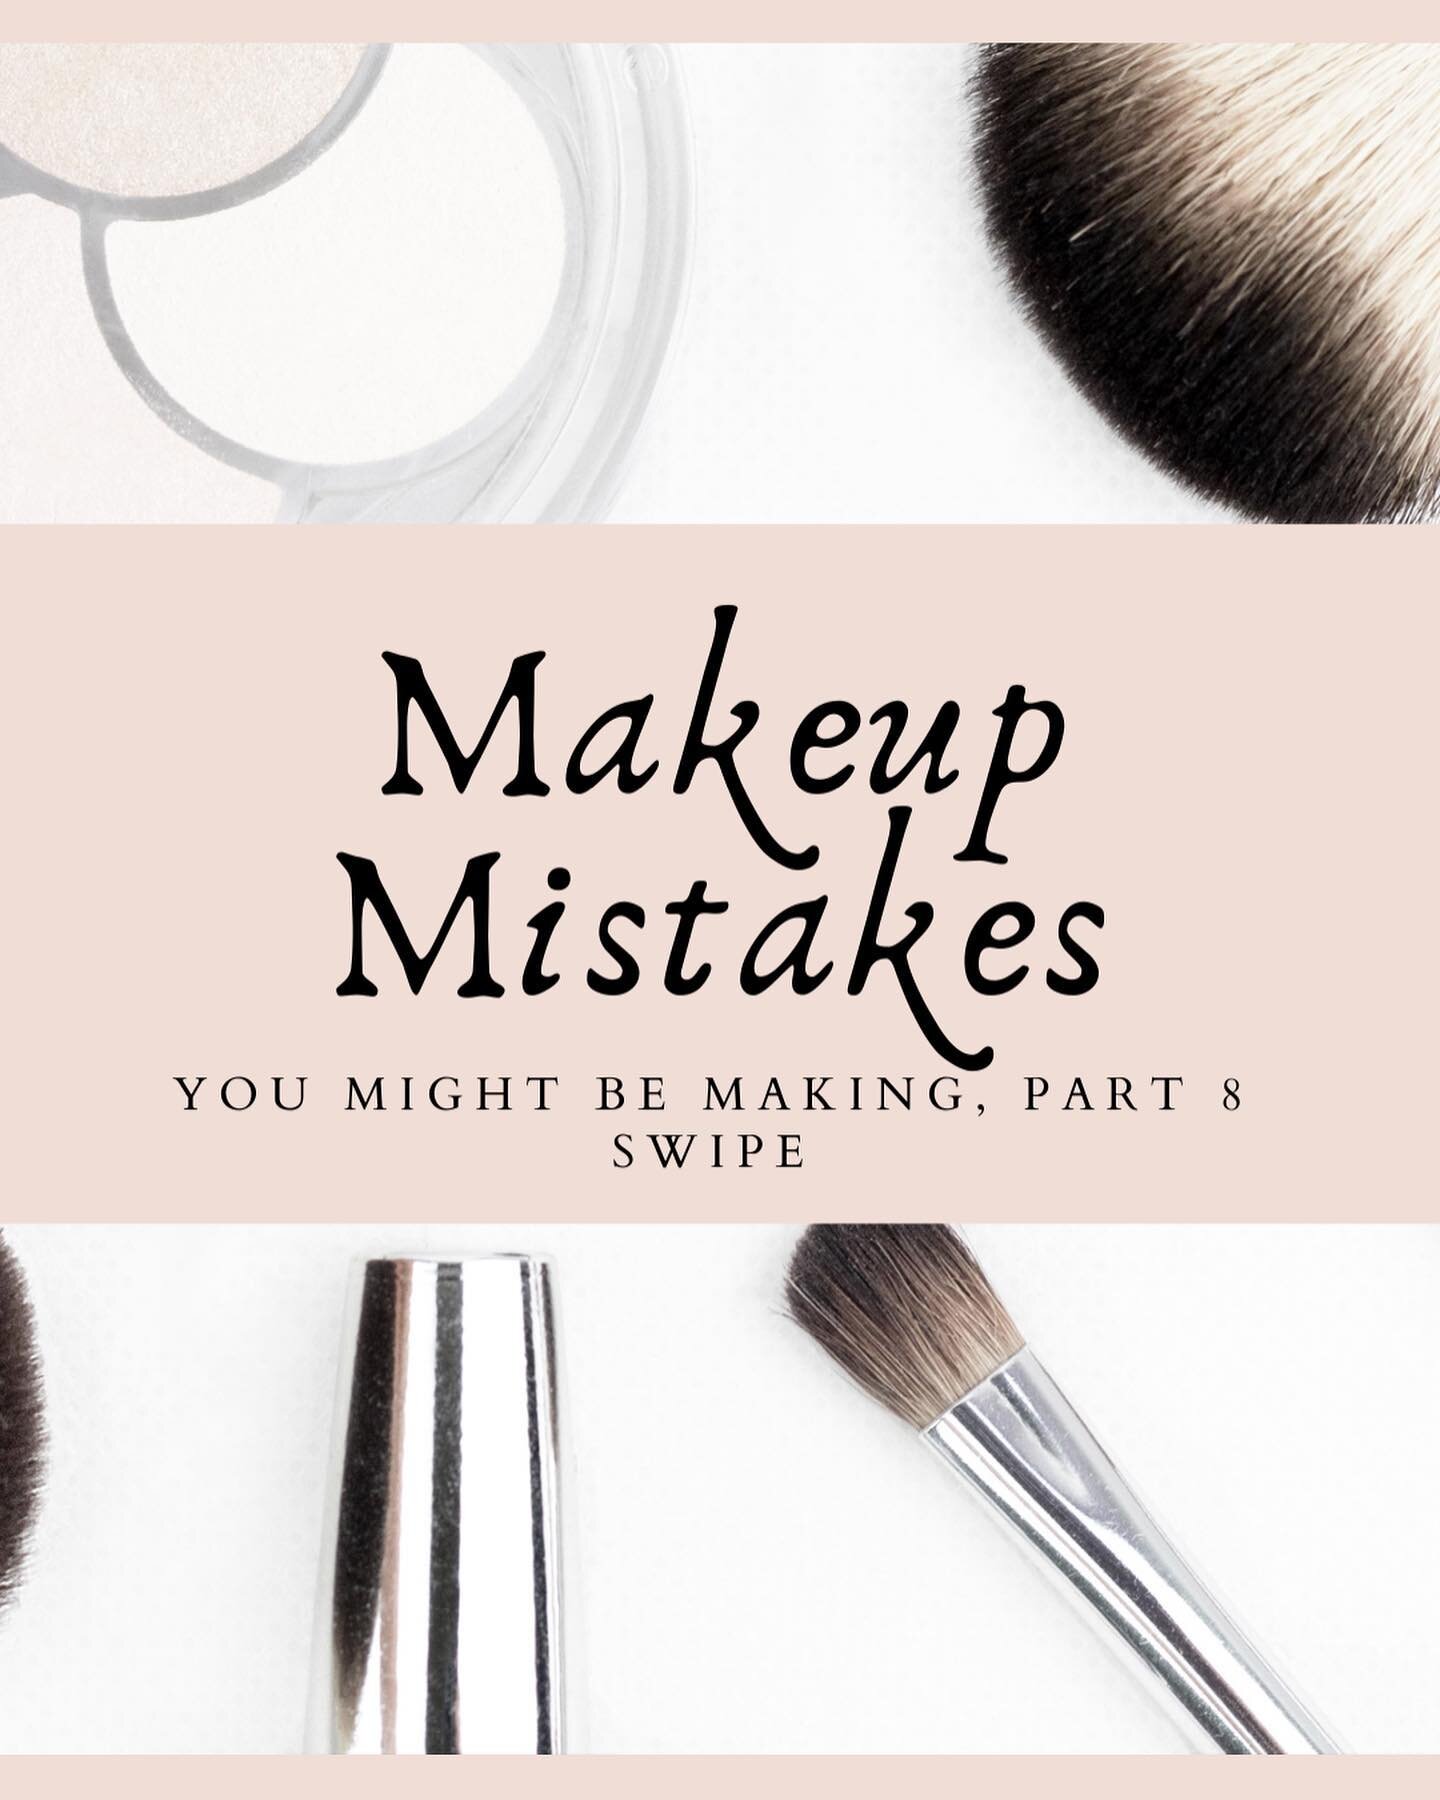 Makeup Mistakes you might be making, part 8! Swipe for Video!

Are you adding a transition color to your eyeshadow looks? In this video, I&rsquo;m breaking down what a transition color is and why it&rsquo;s important!

Share this video with someone w